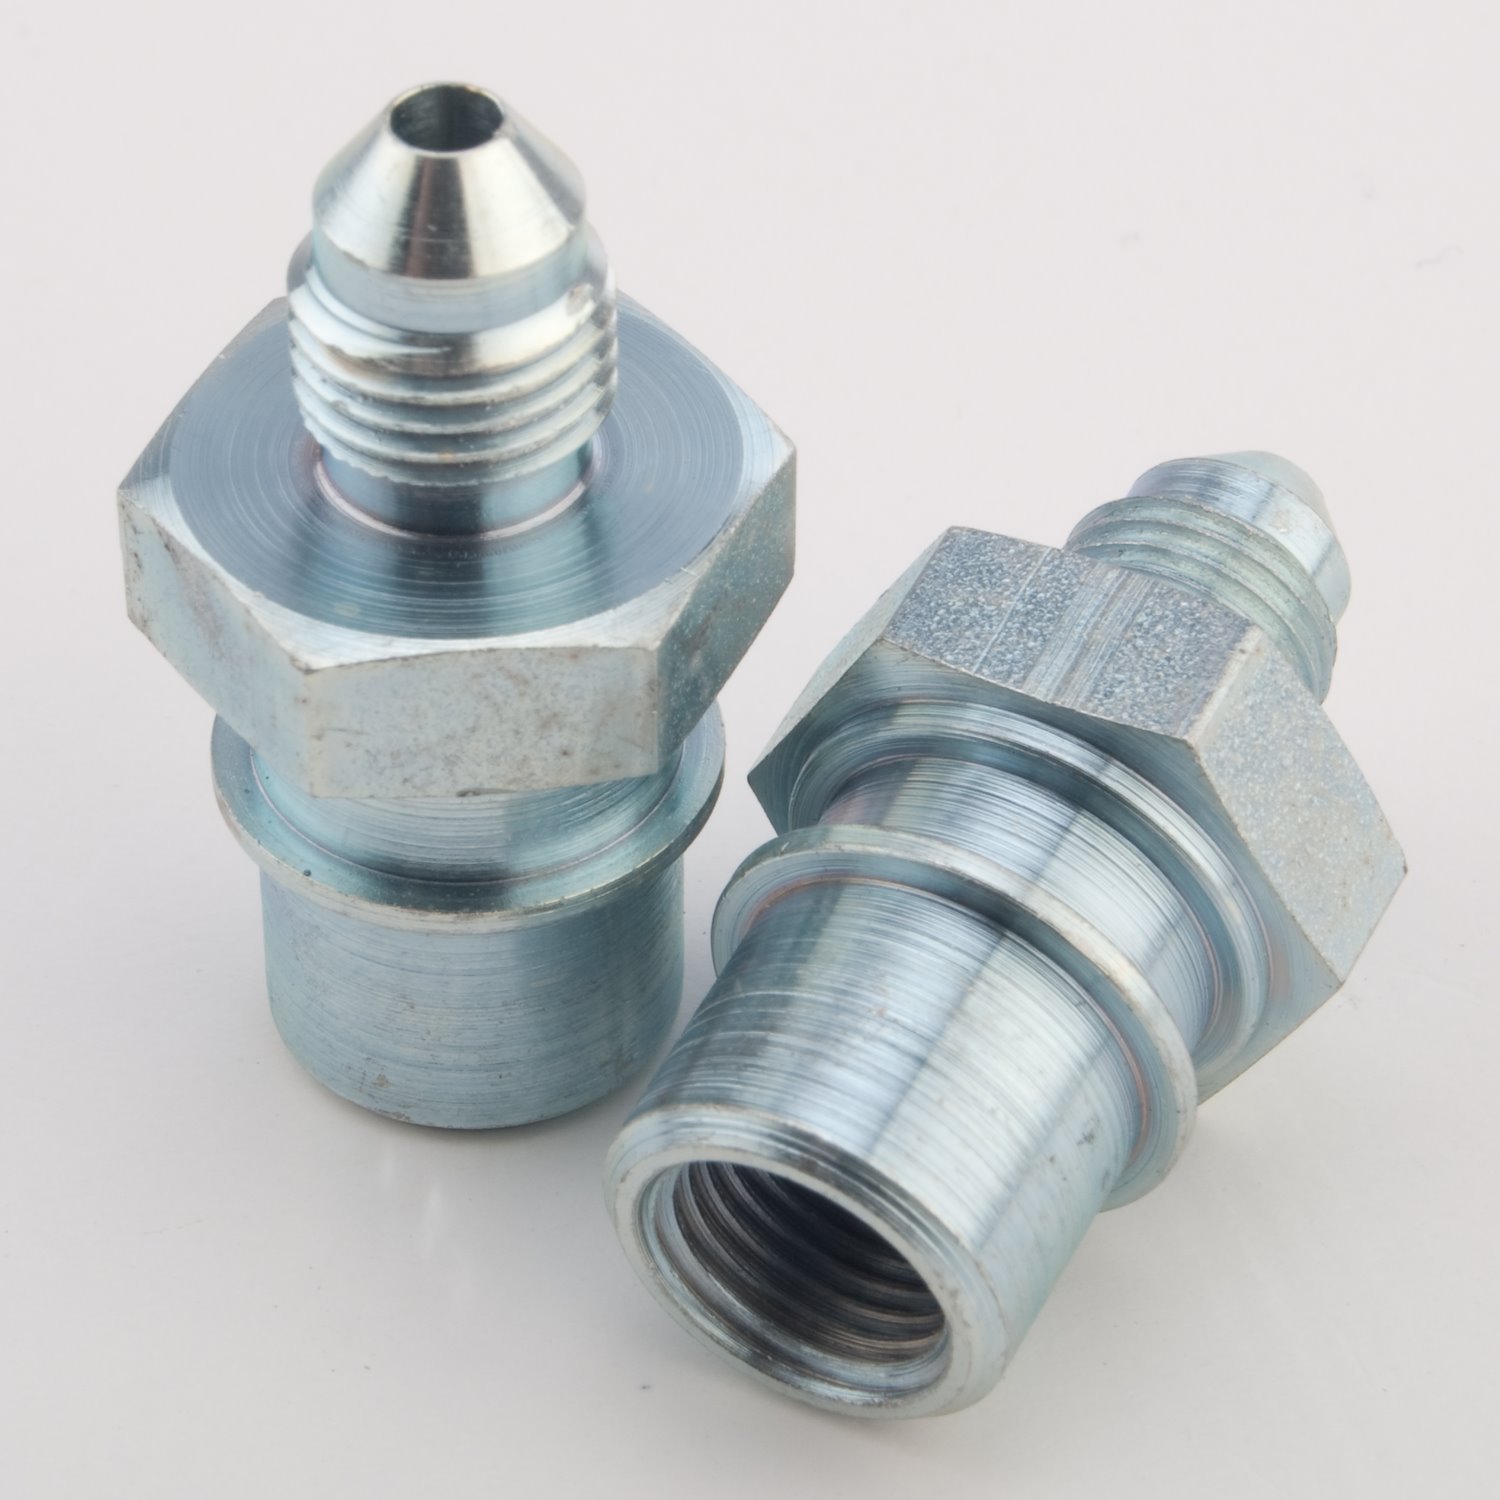 AN to Bubble Flare Female Tube Adapter Fittings